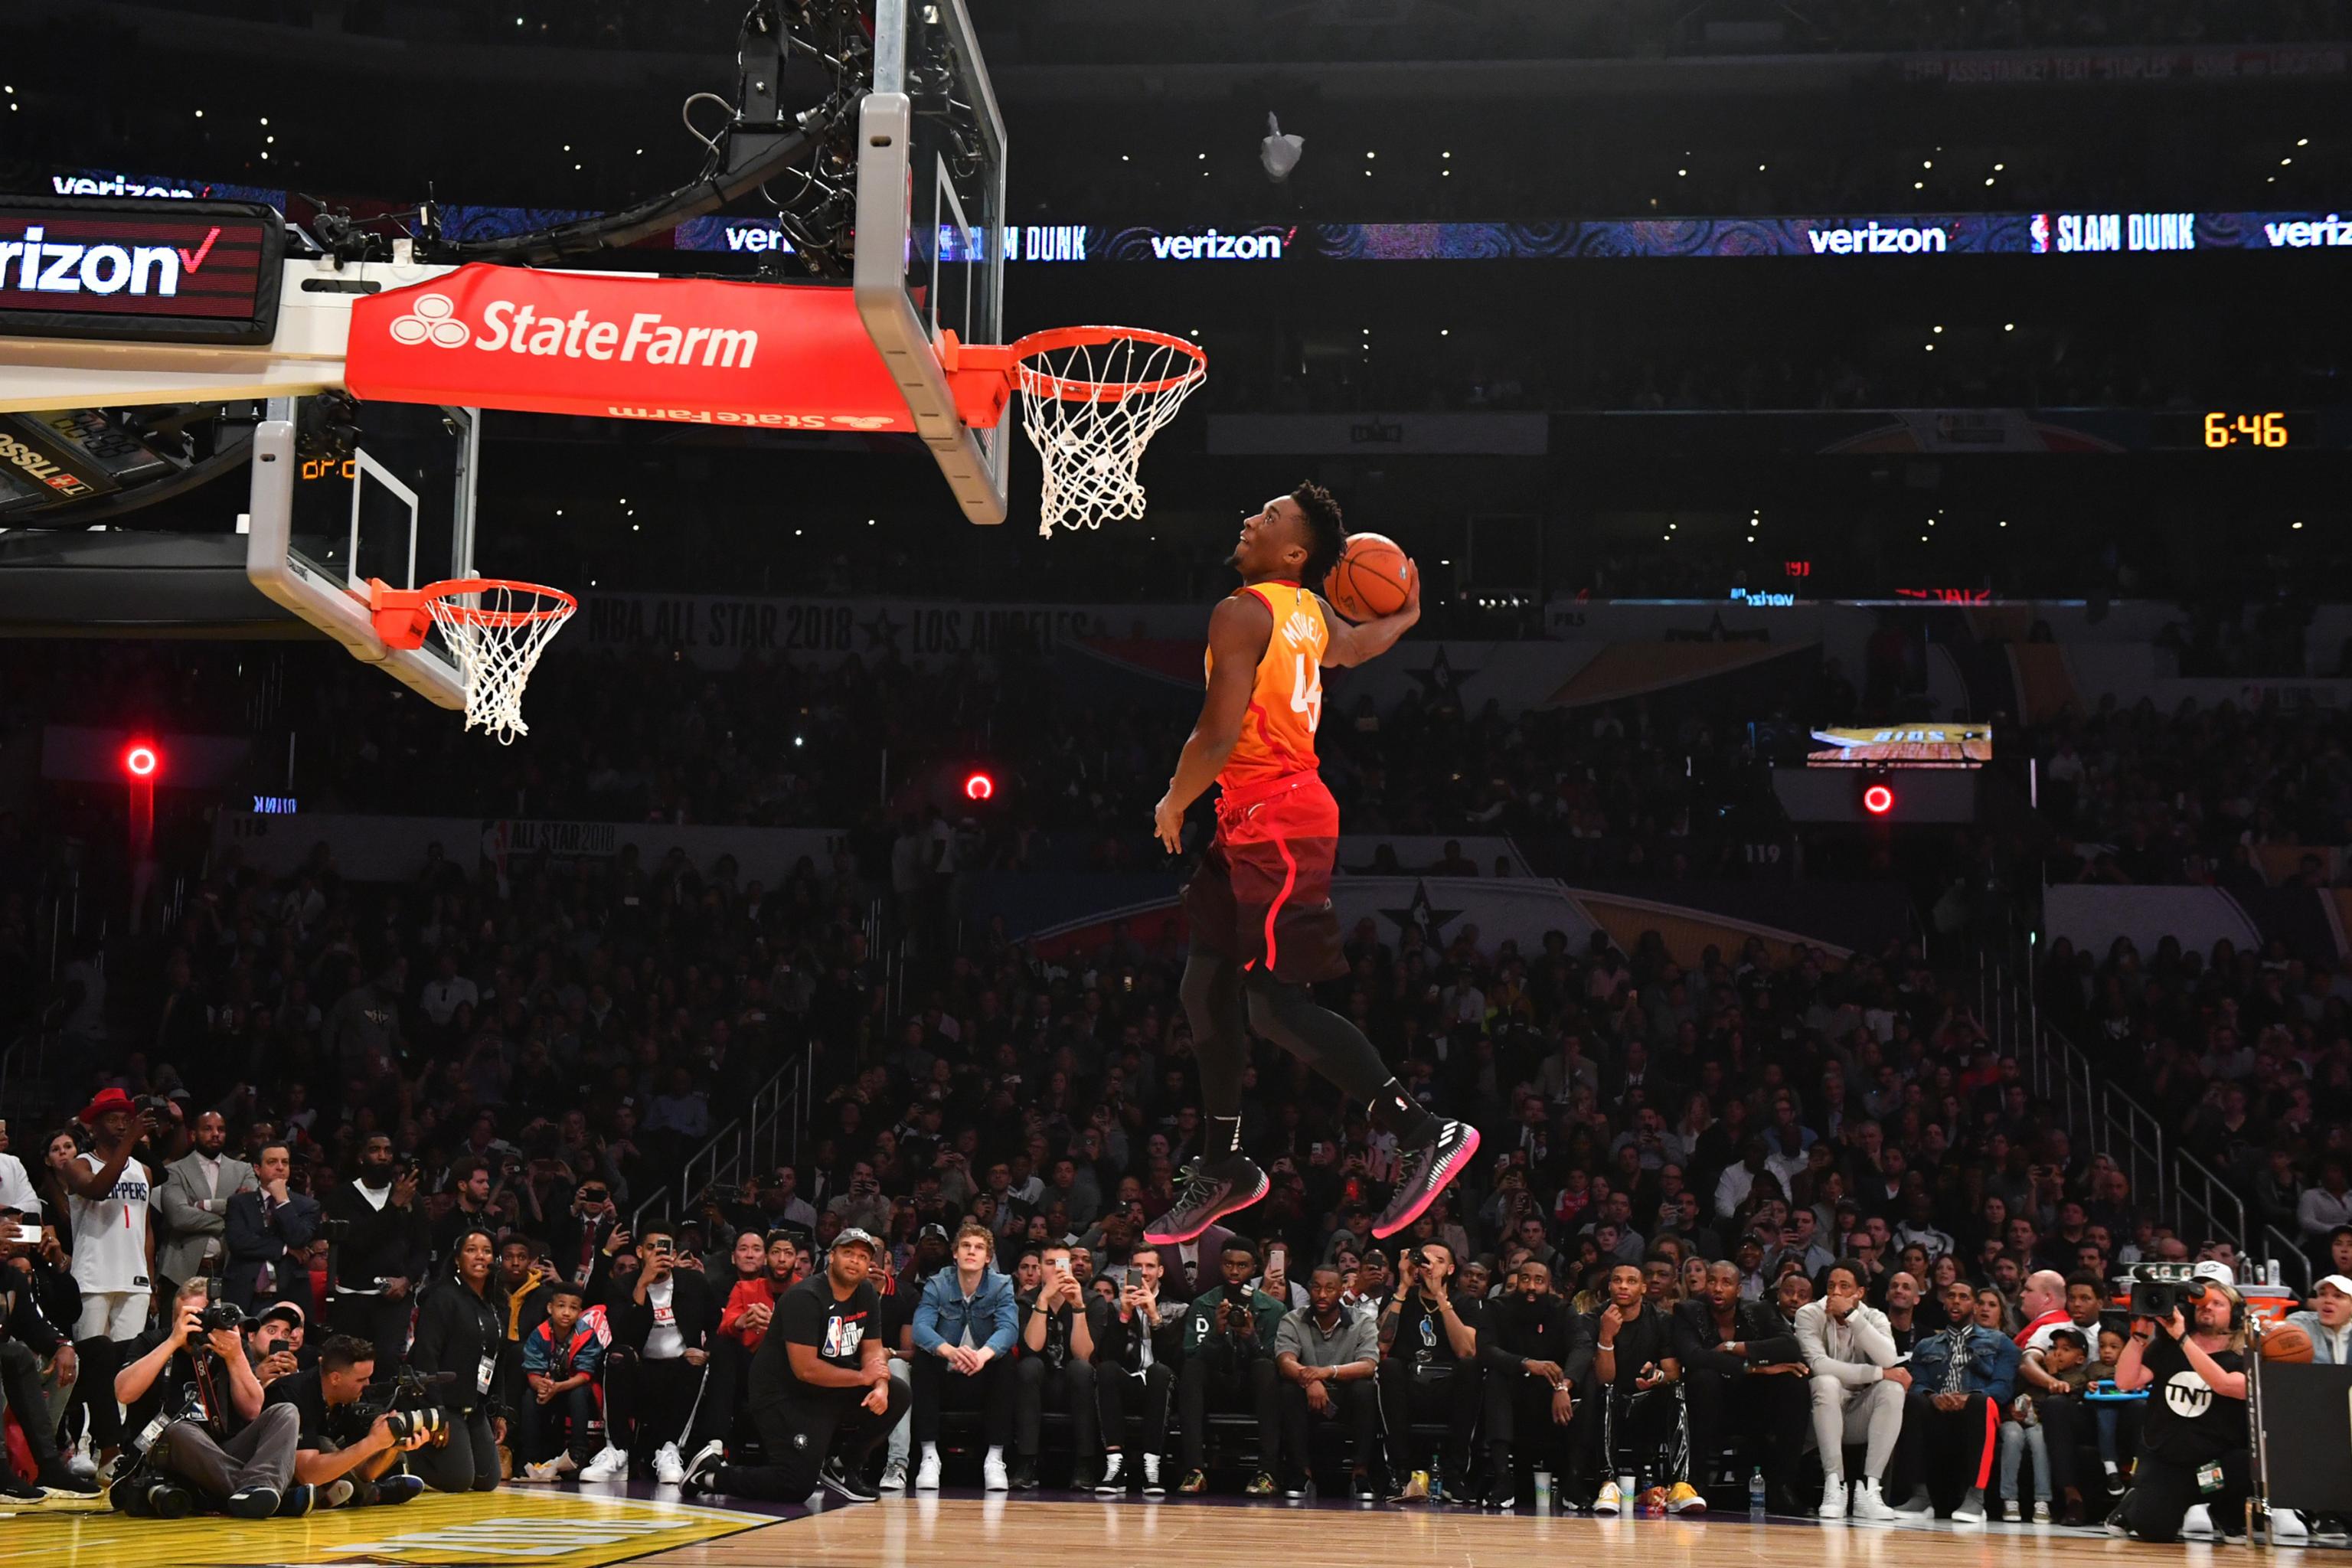 Donovan Mitchell Wins 2018 Nba Slam Dunk Contest Full Scores And Reaction Bleacher Report Latest News Videos And Highlights